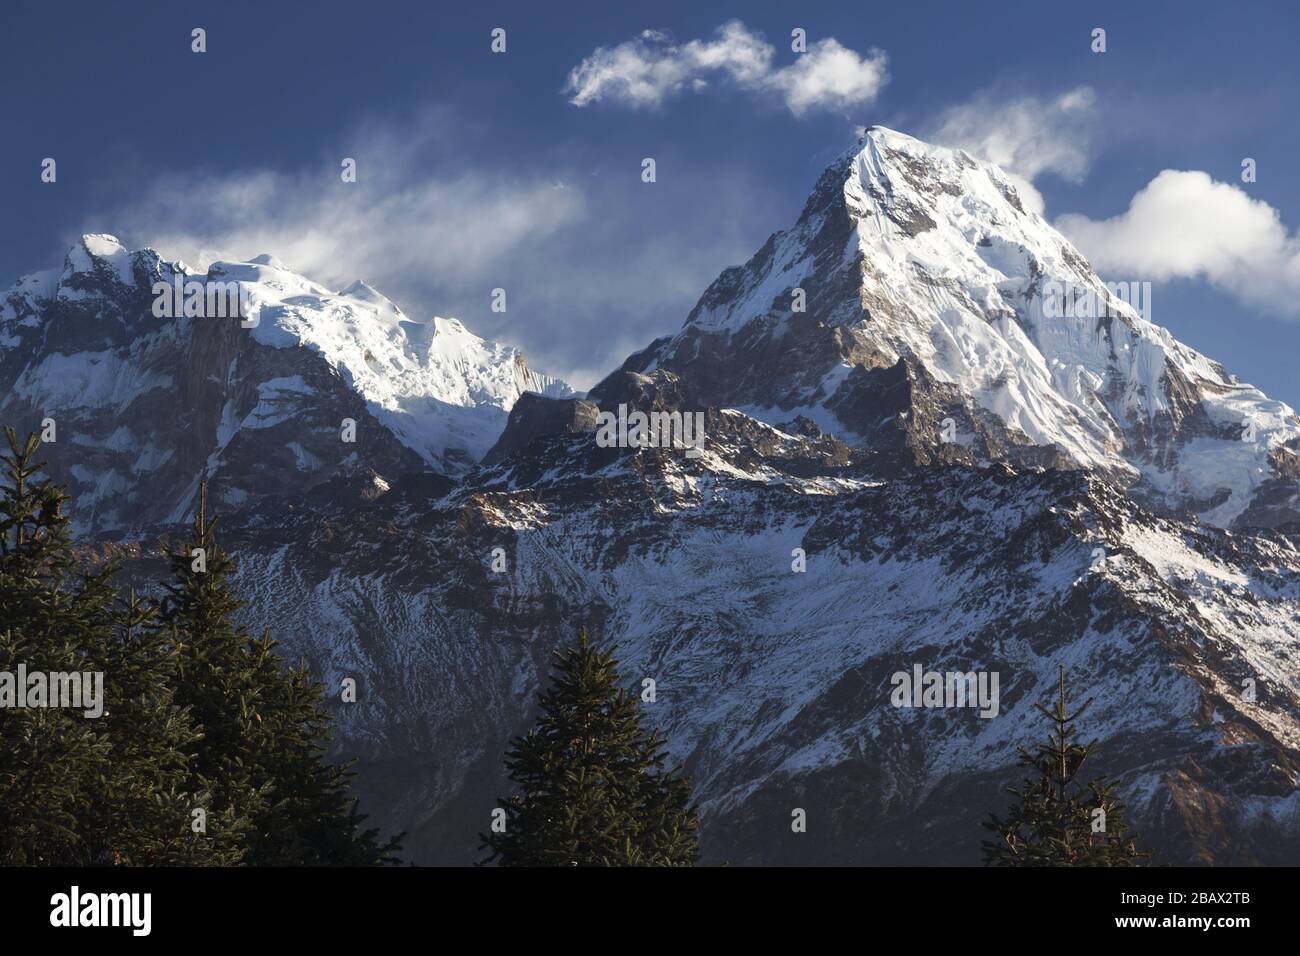 Scenic Early Morning Landscape View of Snowy Annapurna Mountain Peak Range from Poon Hill in Nepal Himalaya Mountains Stock Photo